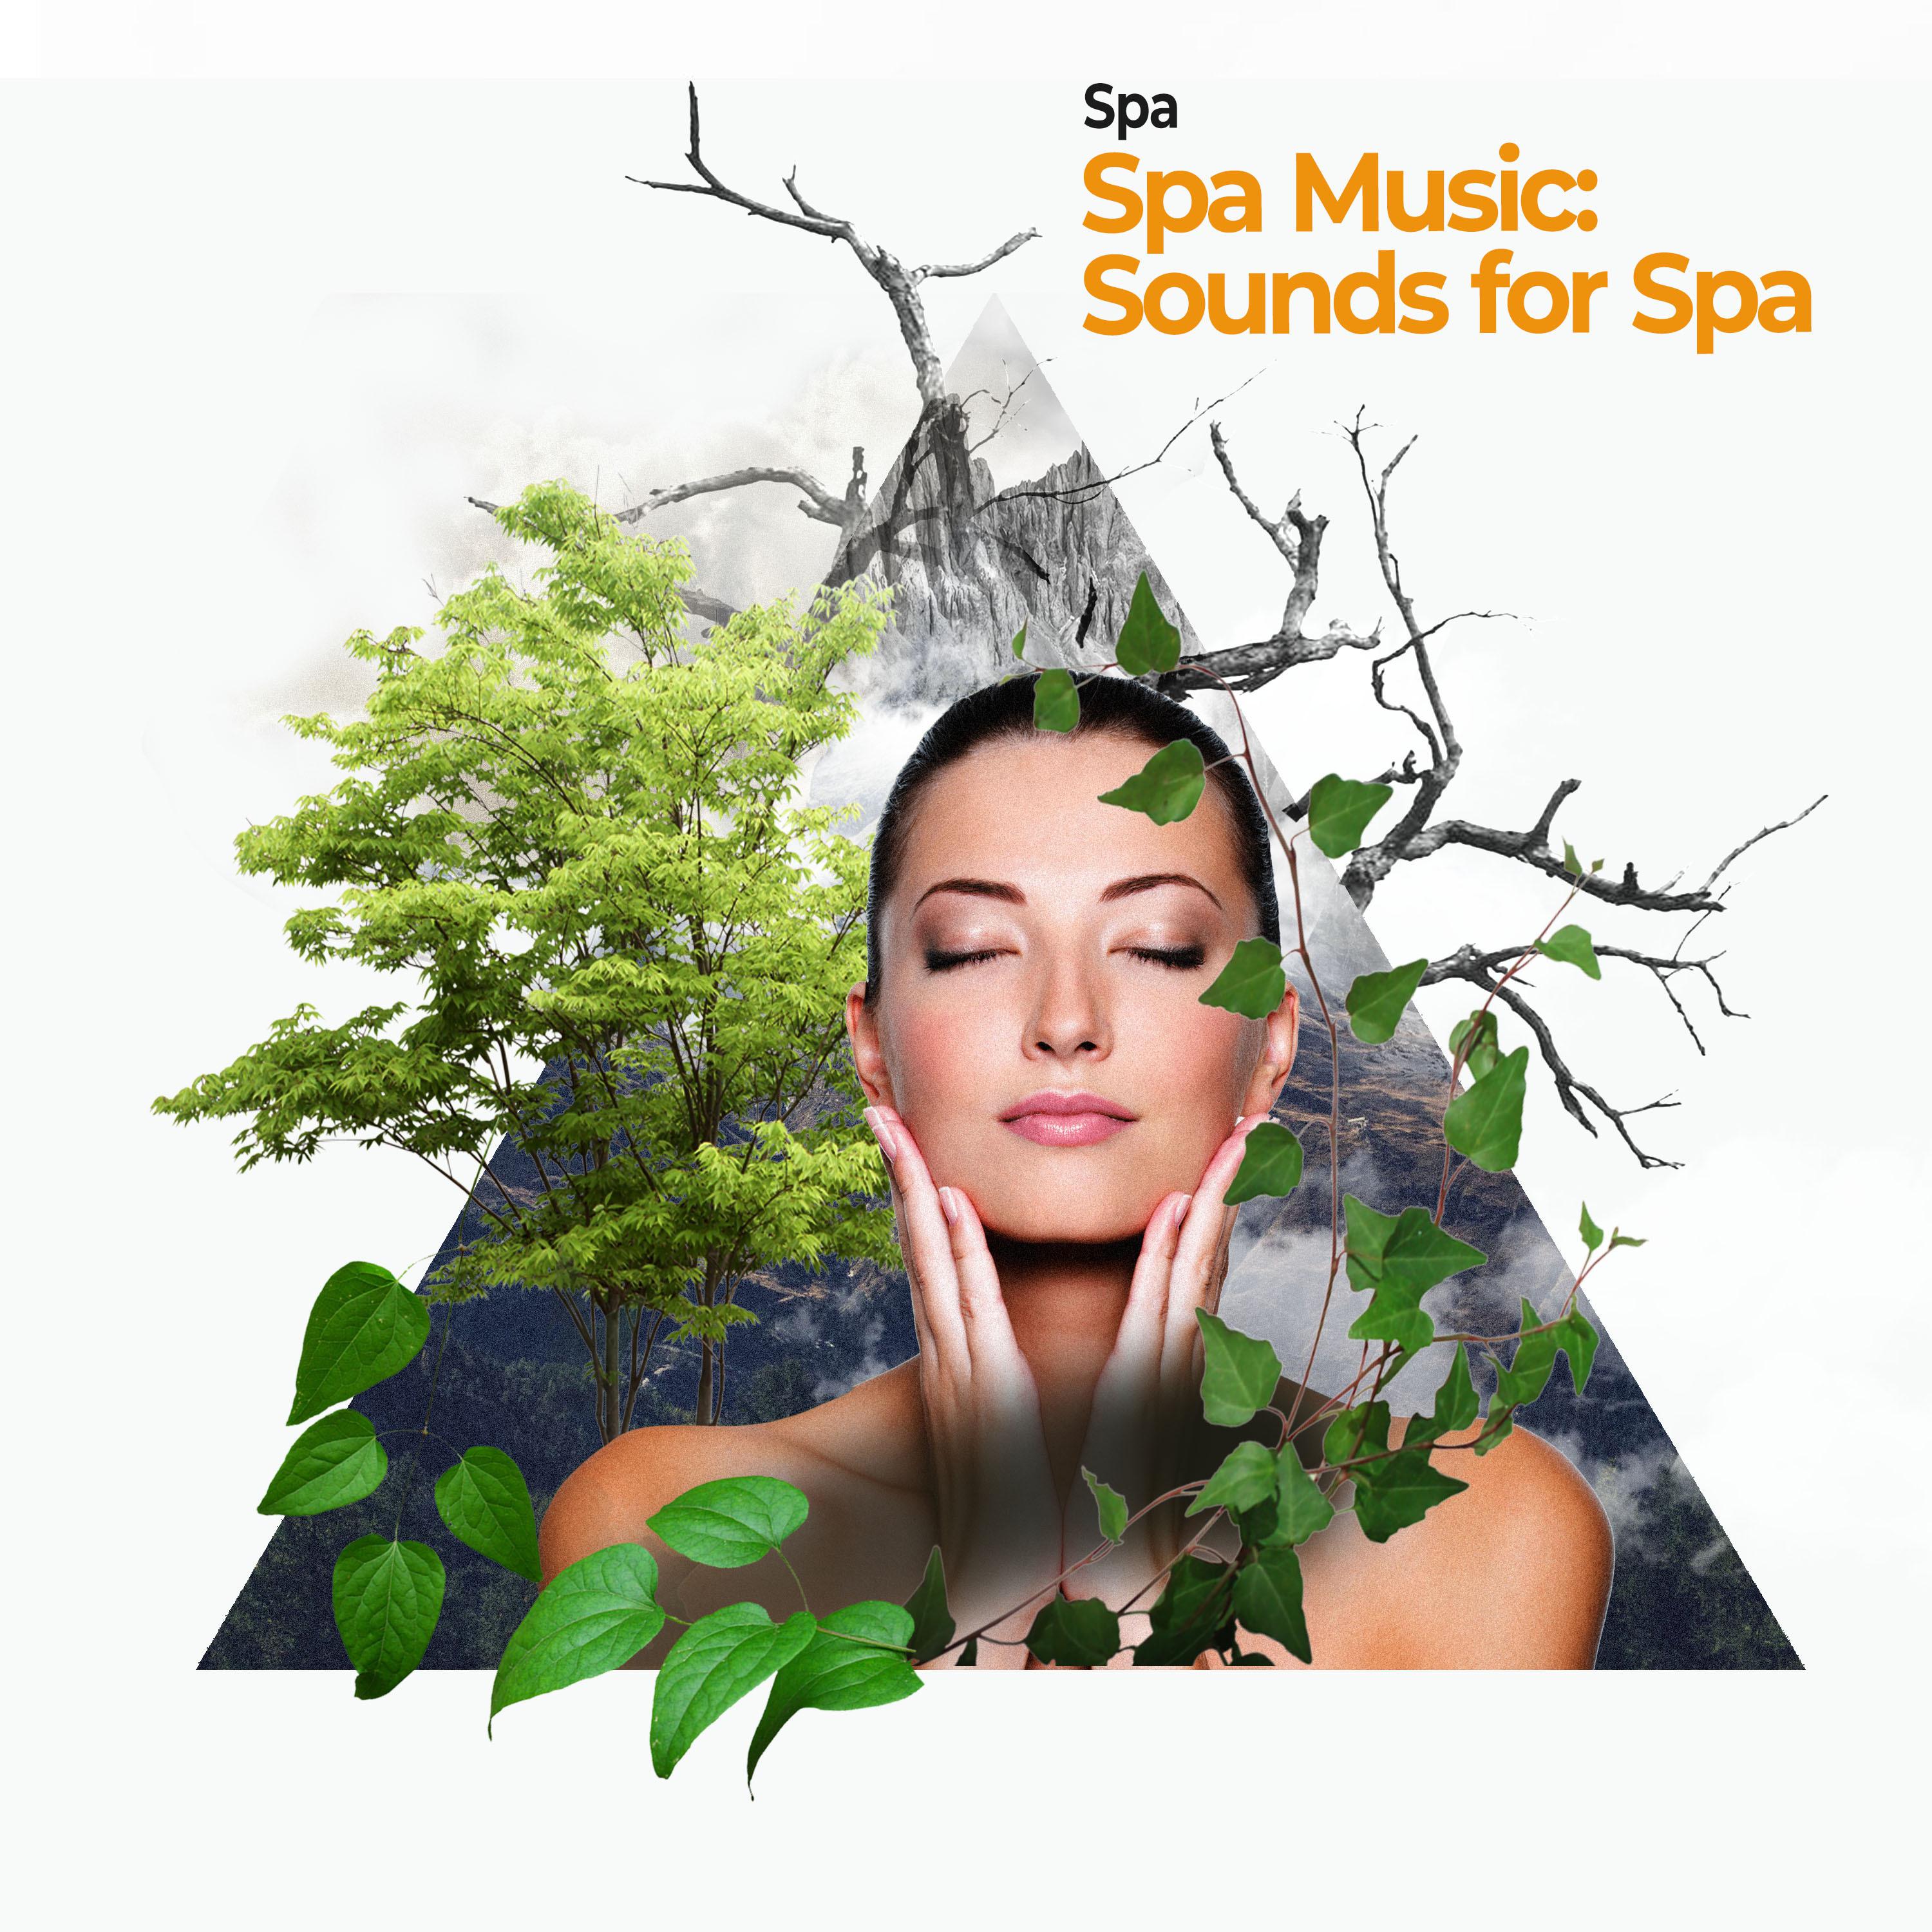 Spa Music: Sounds for Spa